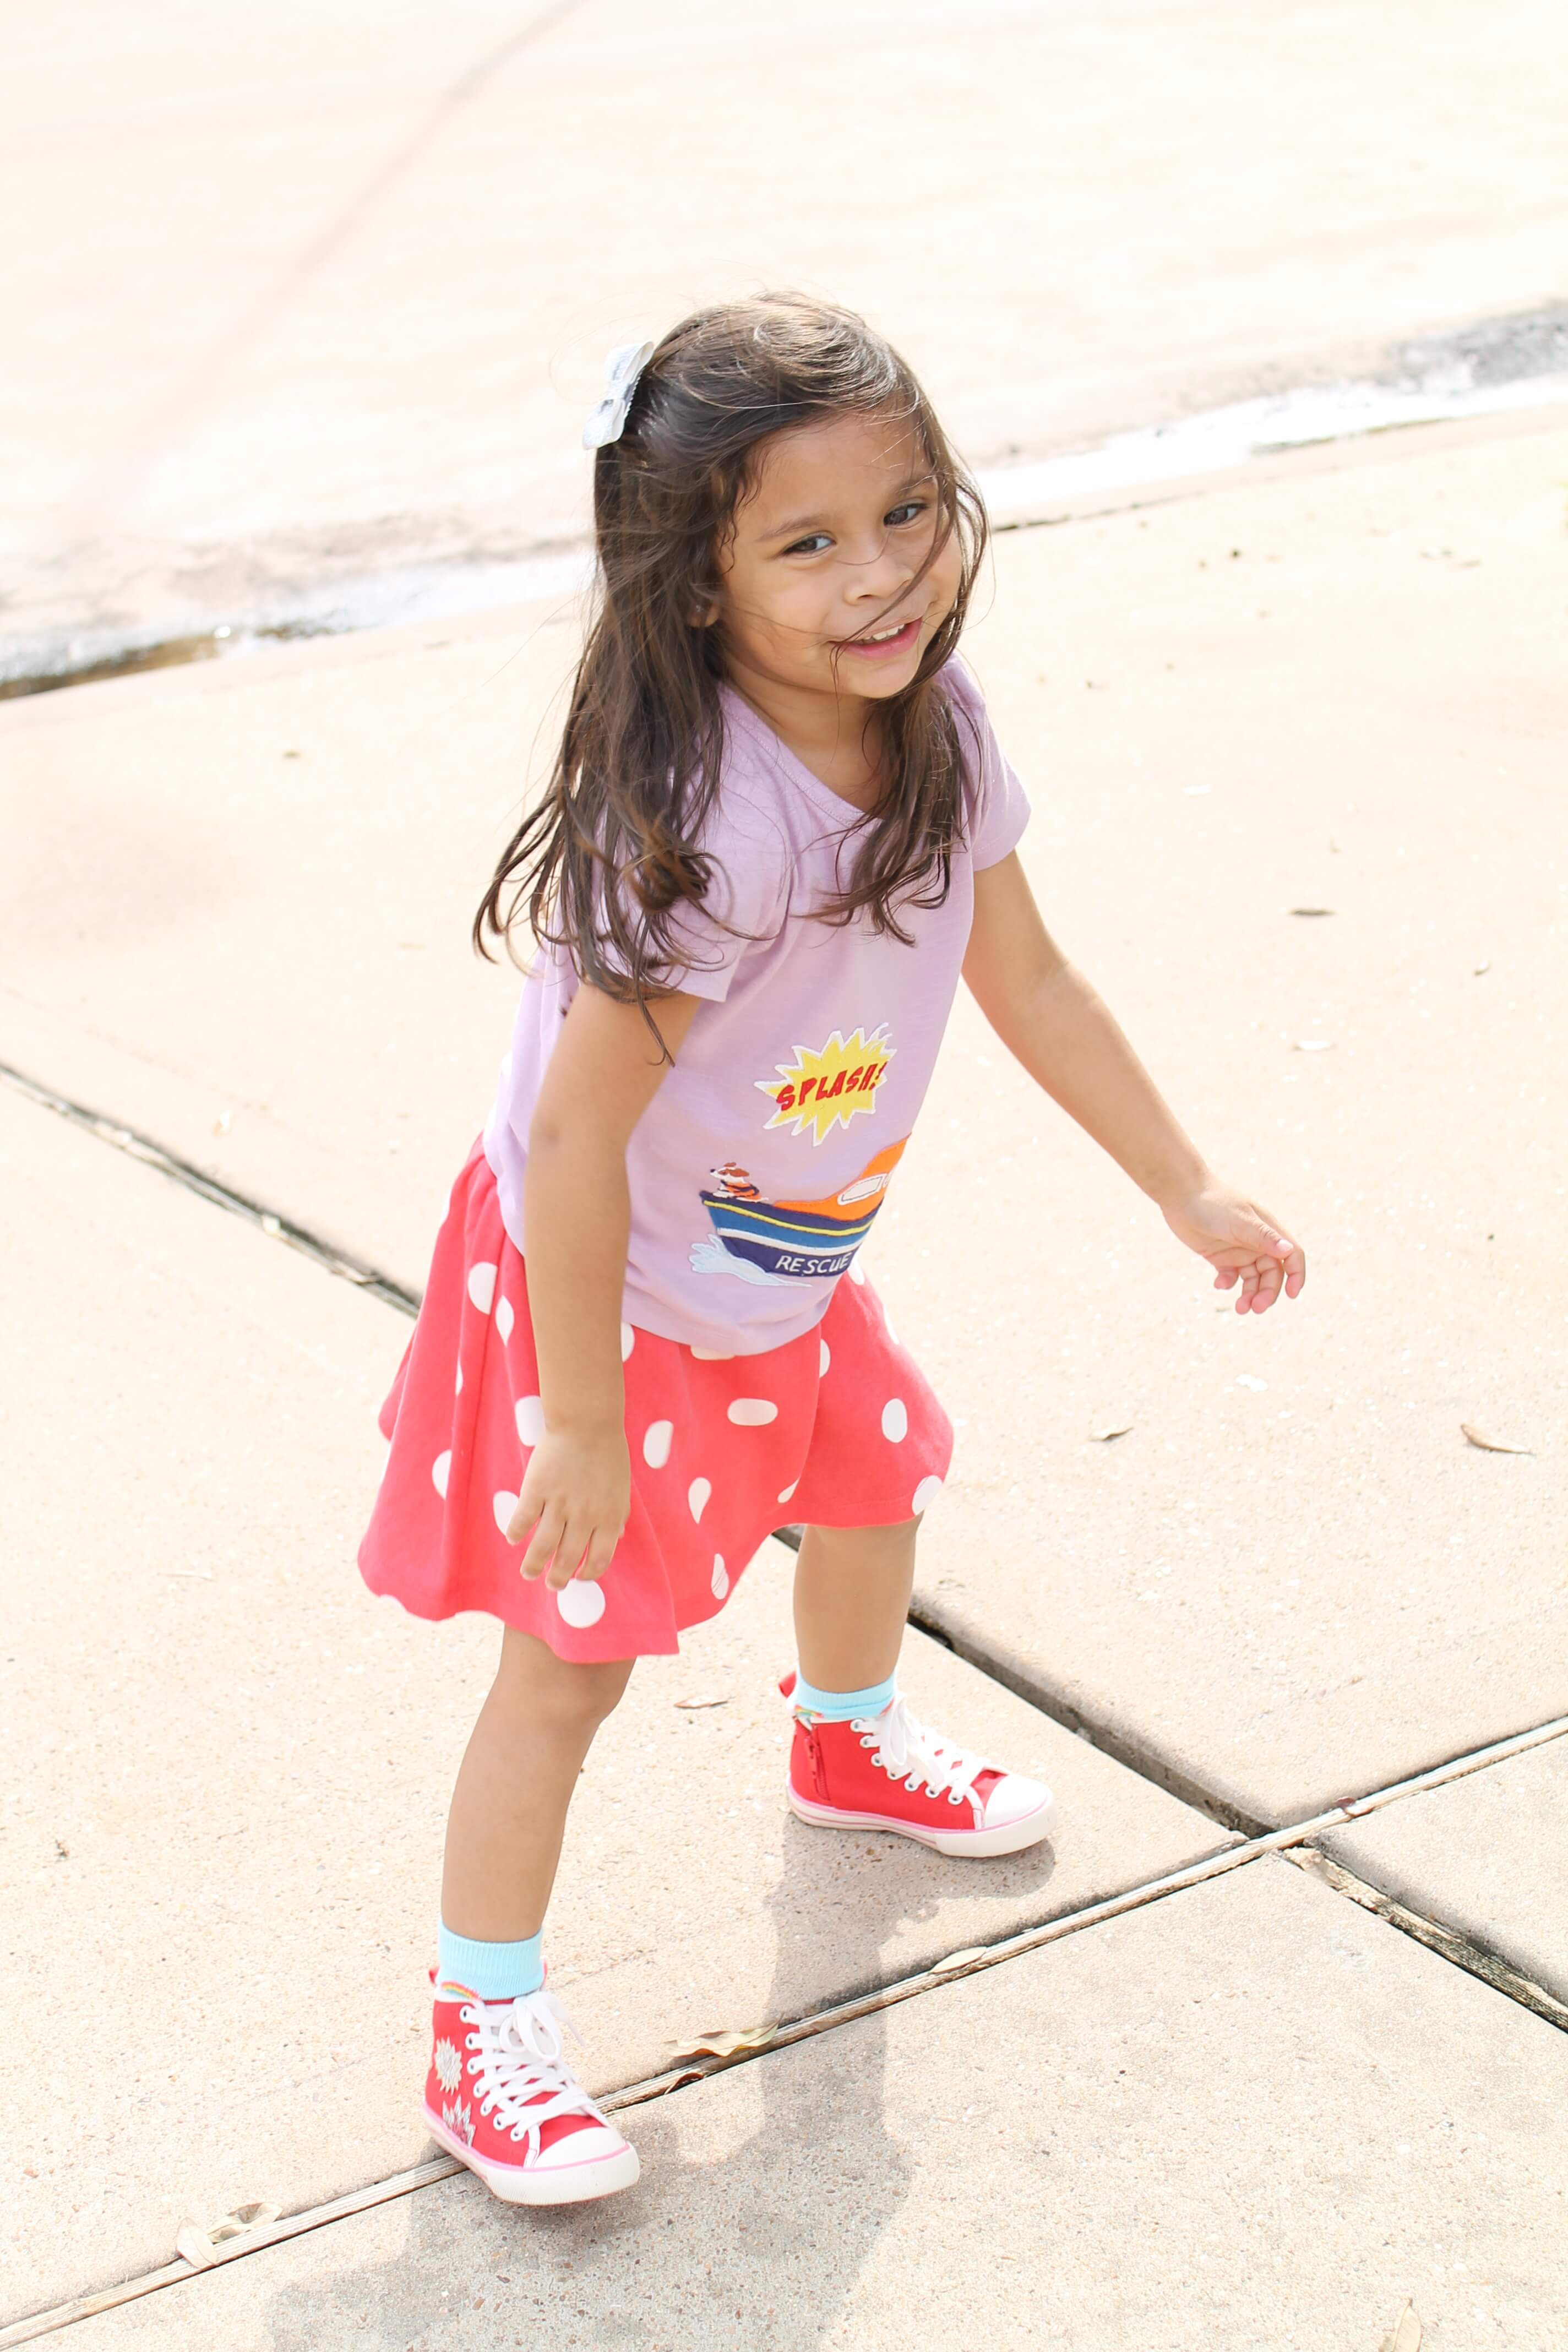 Splash! Cute kids spring clothes with a hero & rescue theme. Mini Boden's spring line & 500 giveaway! #minibodentotherescue